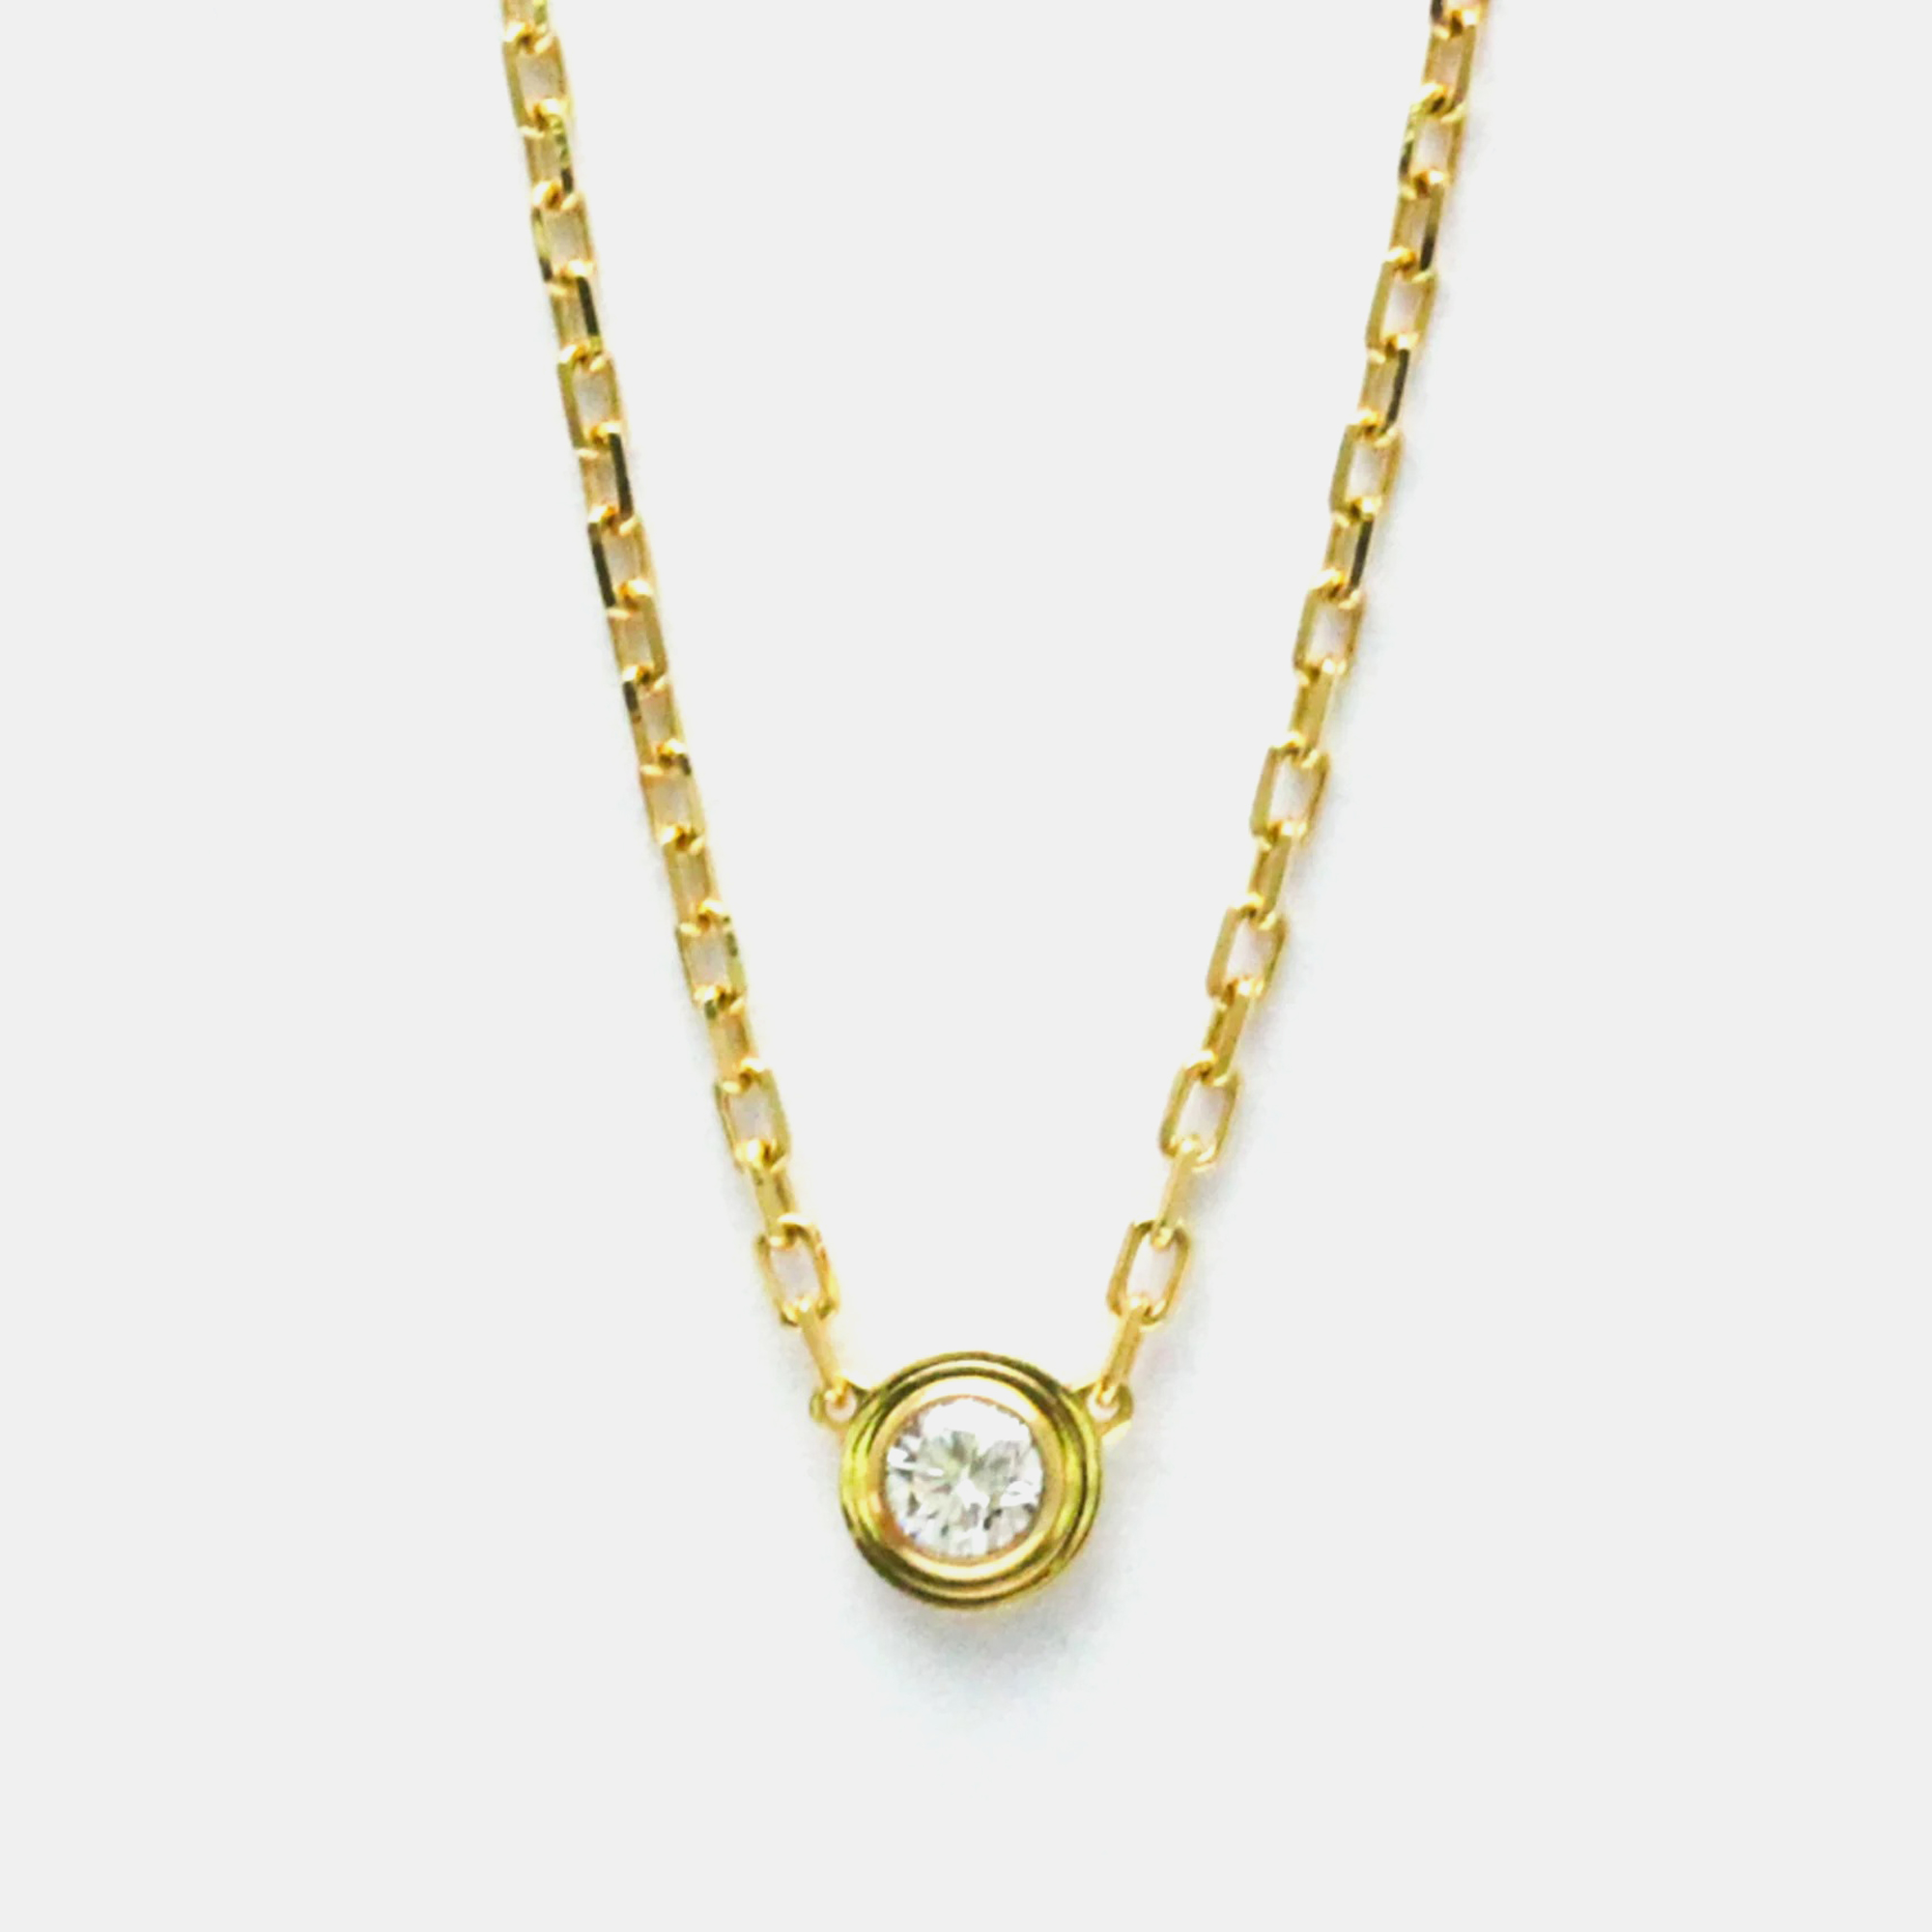 Cartier 18k yellow gold and diamond d'amour pendant necklace